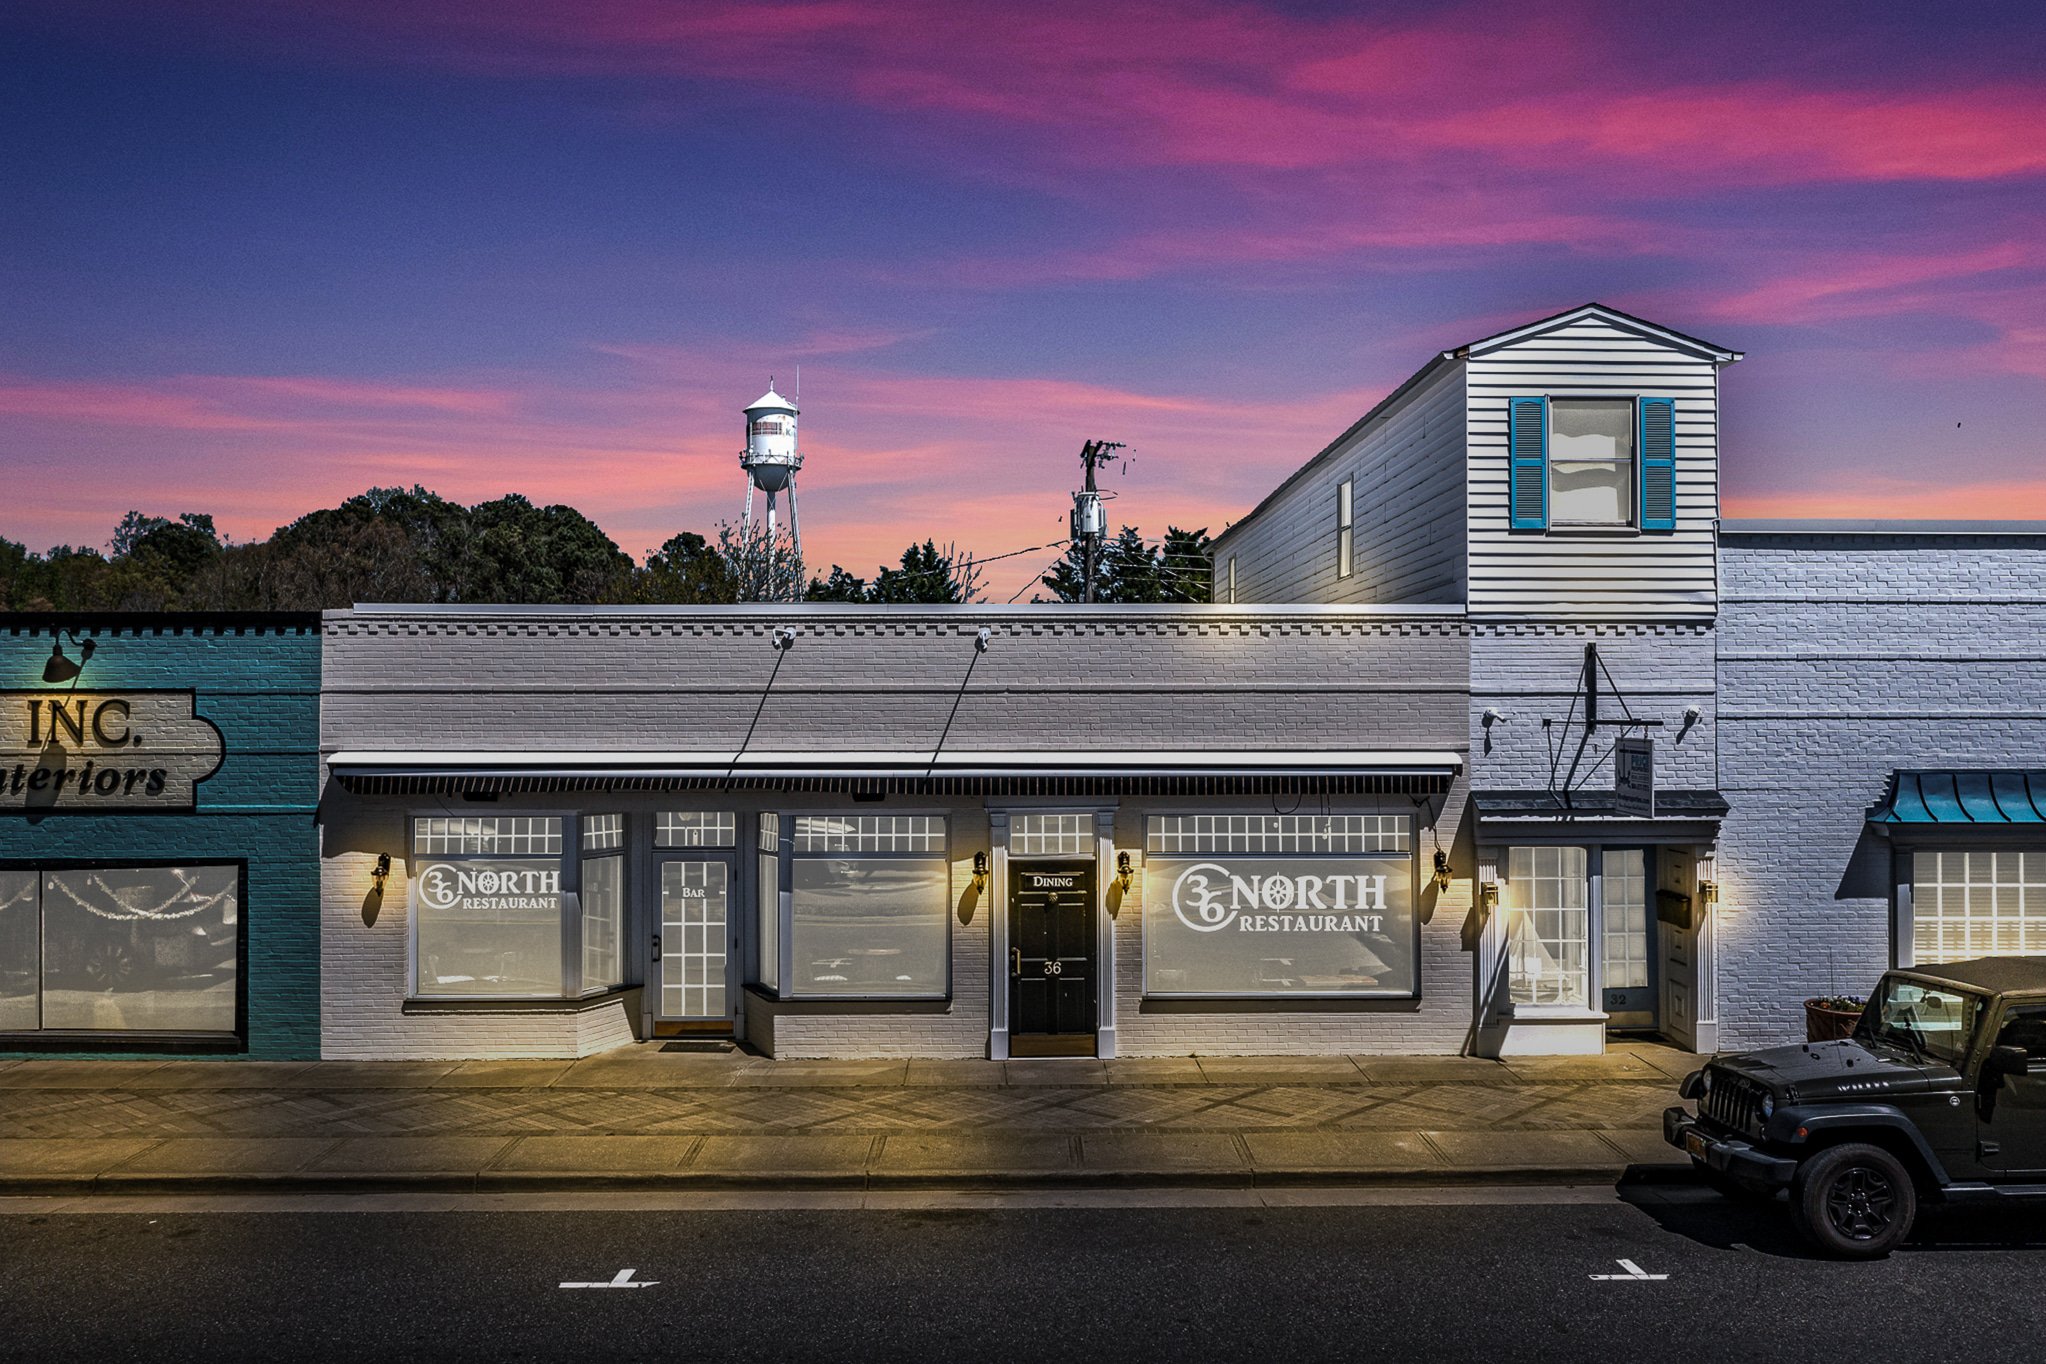 Commercial Property for Sale: Business-Ready Restaurant in the Heart of Kilmarnock, Virginia